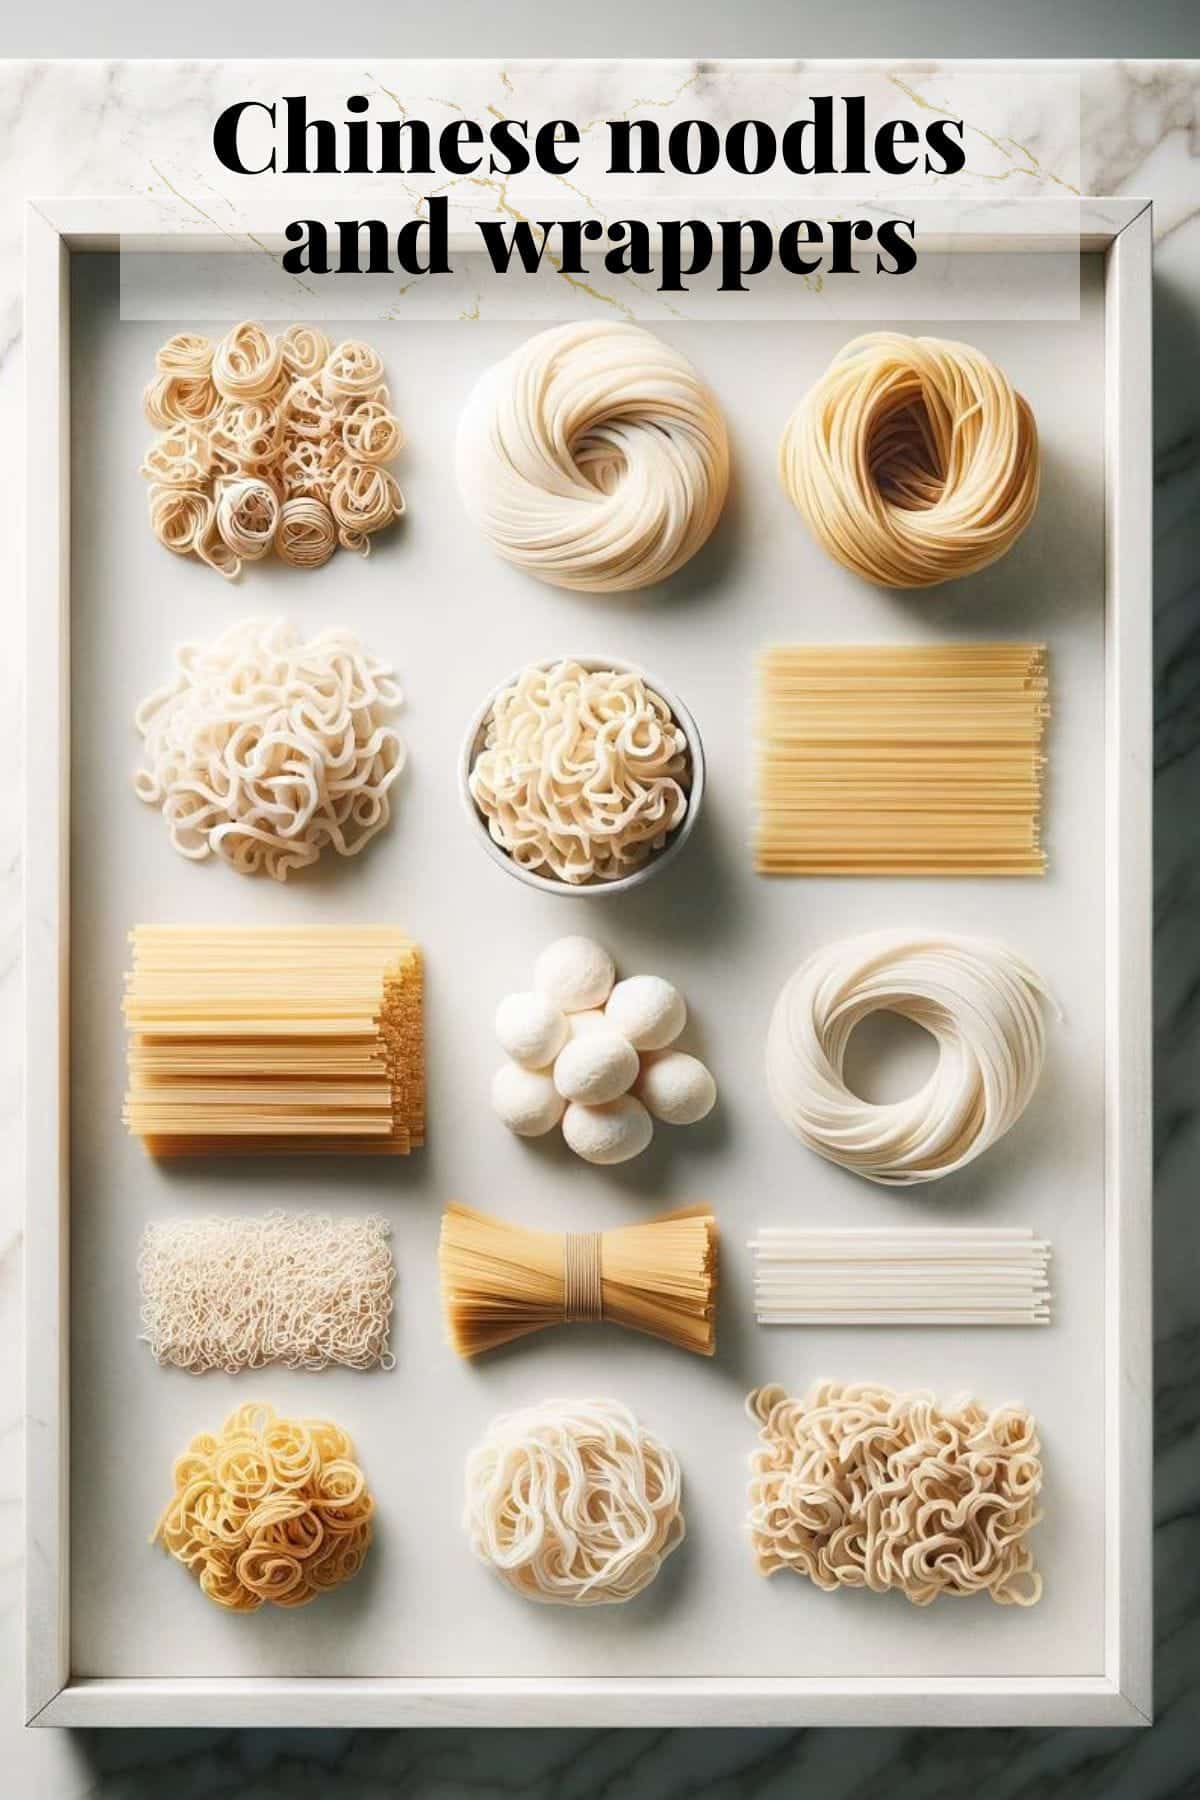 Image shows various types of chinese noodles before they are cooked and displayed on a white marble board.